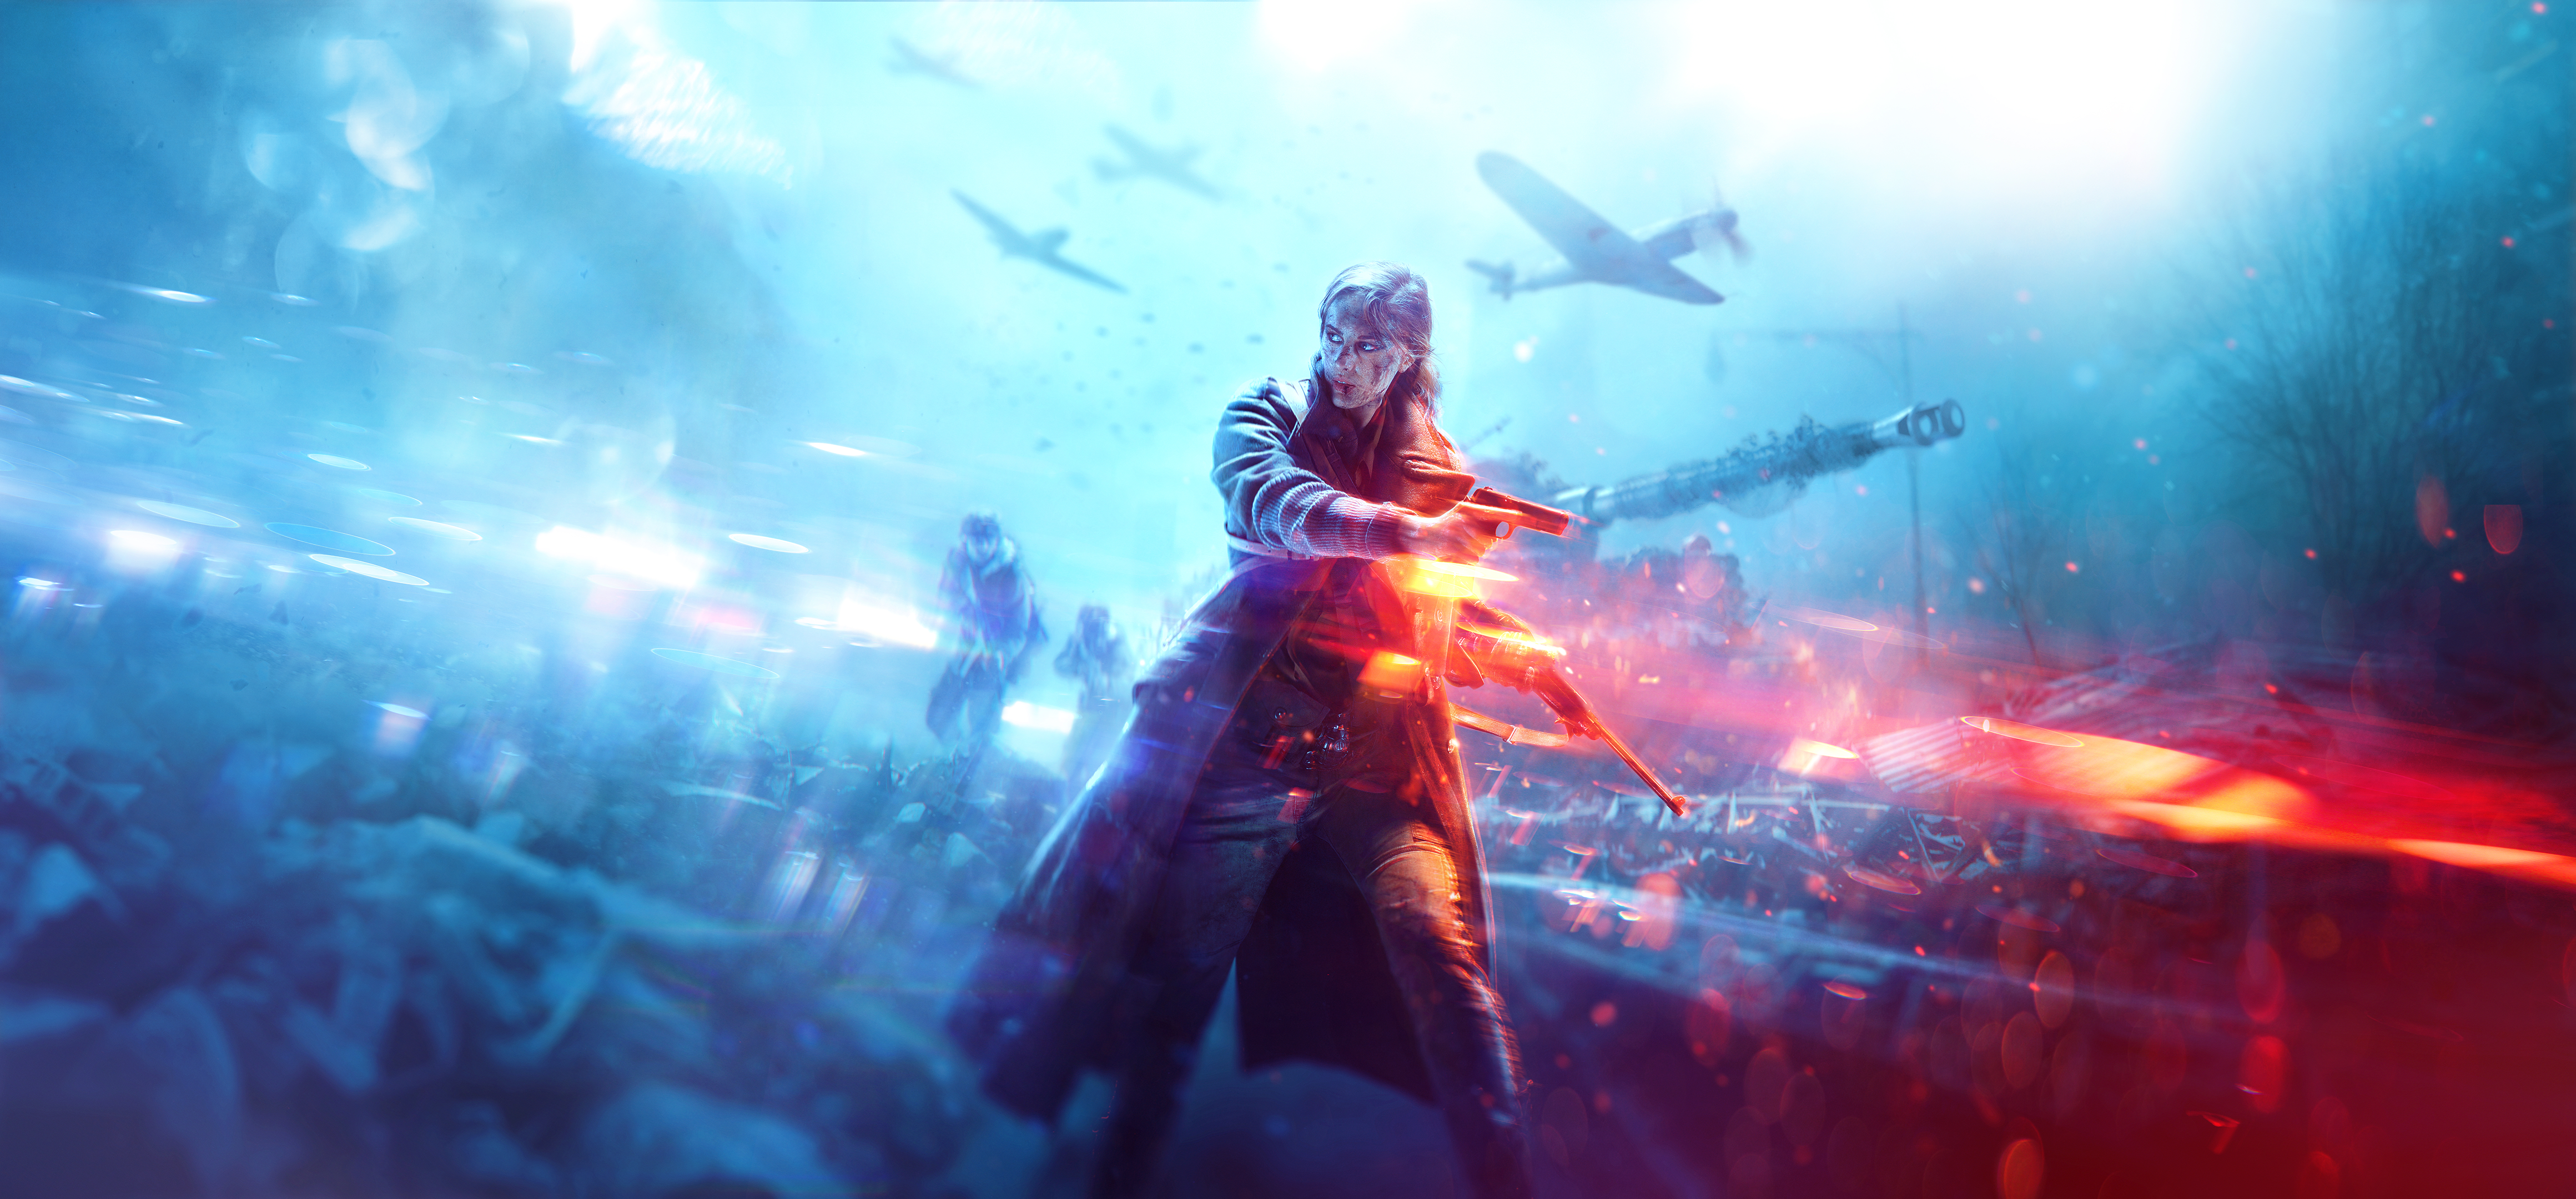 240+ Battlefield V HD Wallpapers and Backgrounds